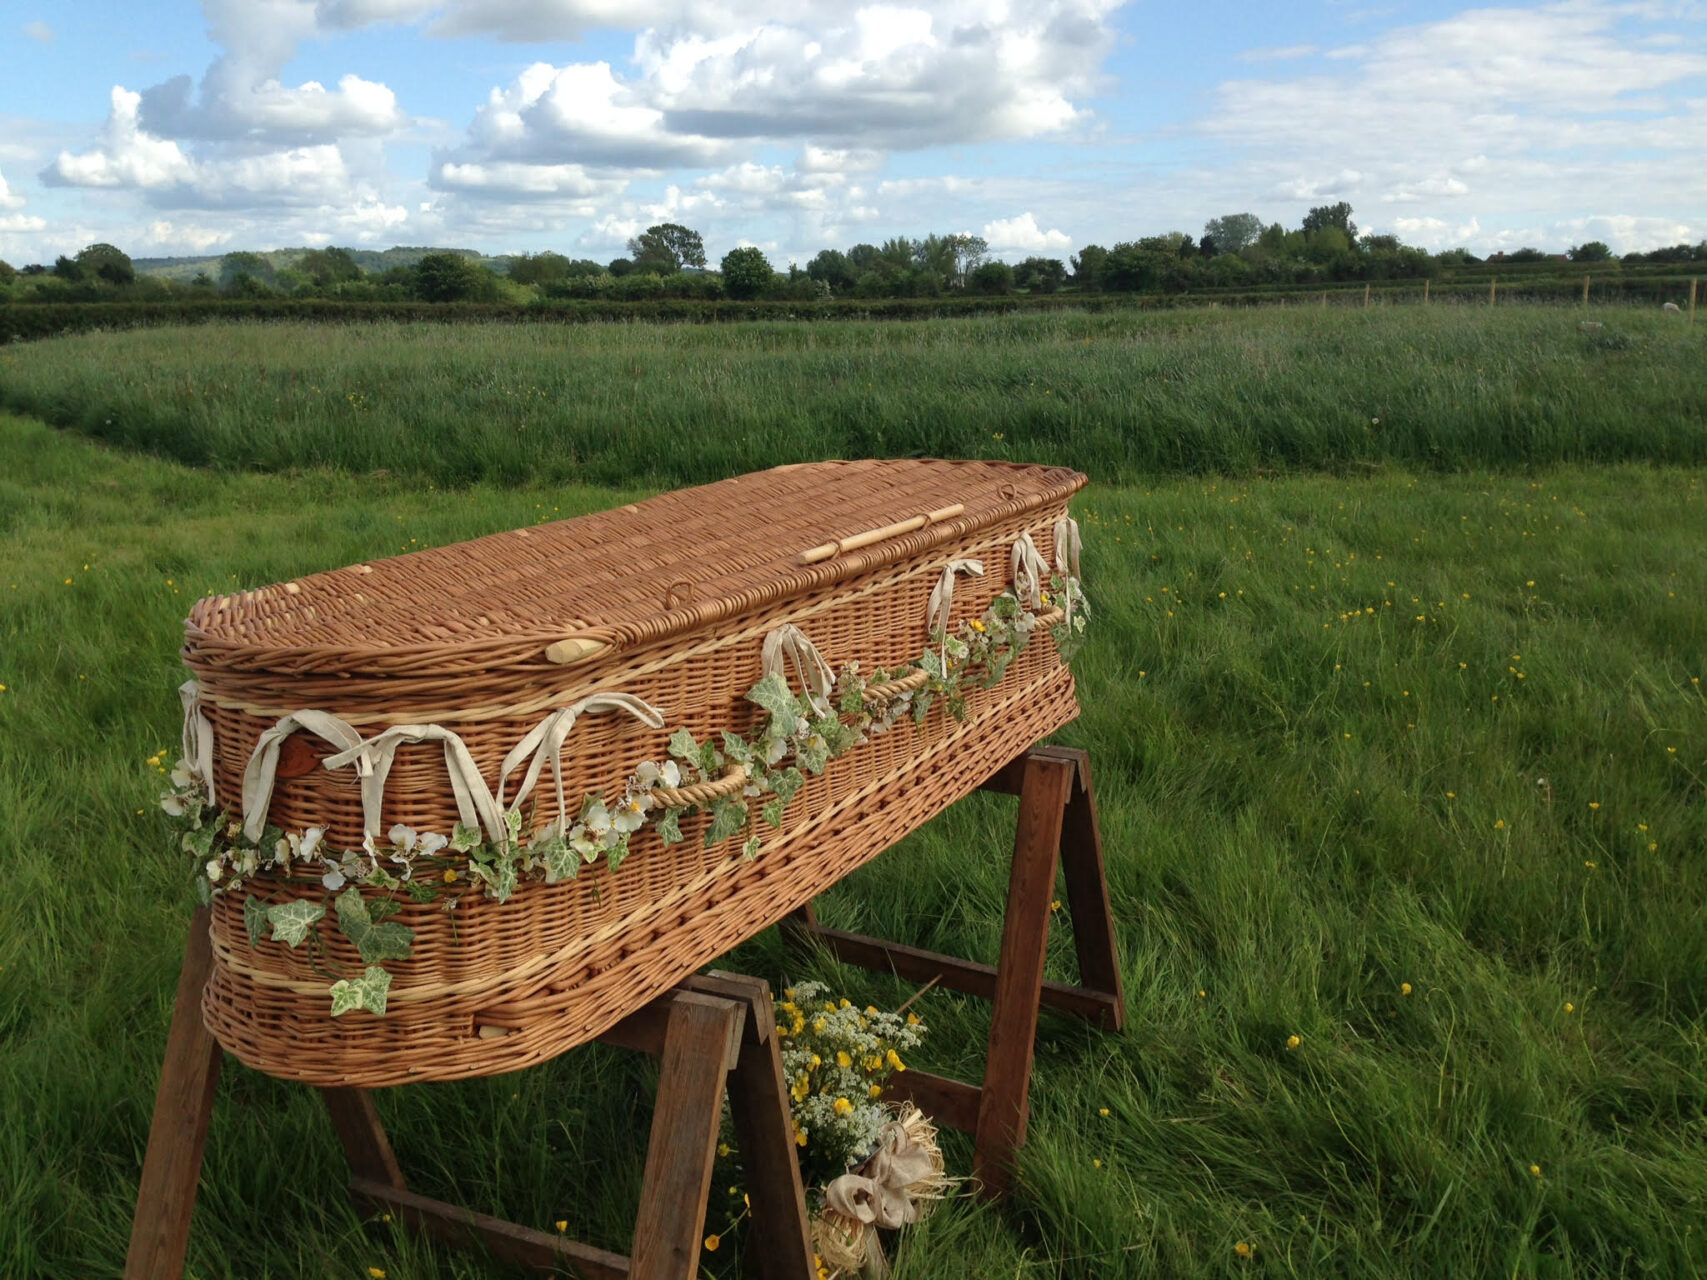 A locally sourced wicker coffin, decorated with ivy, sitting in the Aylesbury Vale natural burial meadow, which has long green grass and trees in the distance.